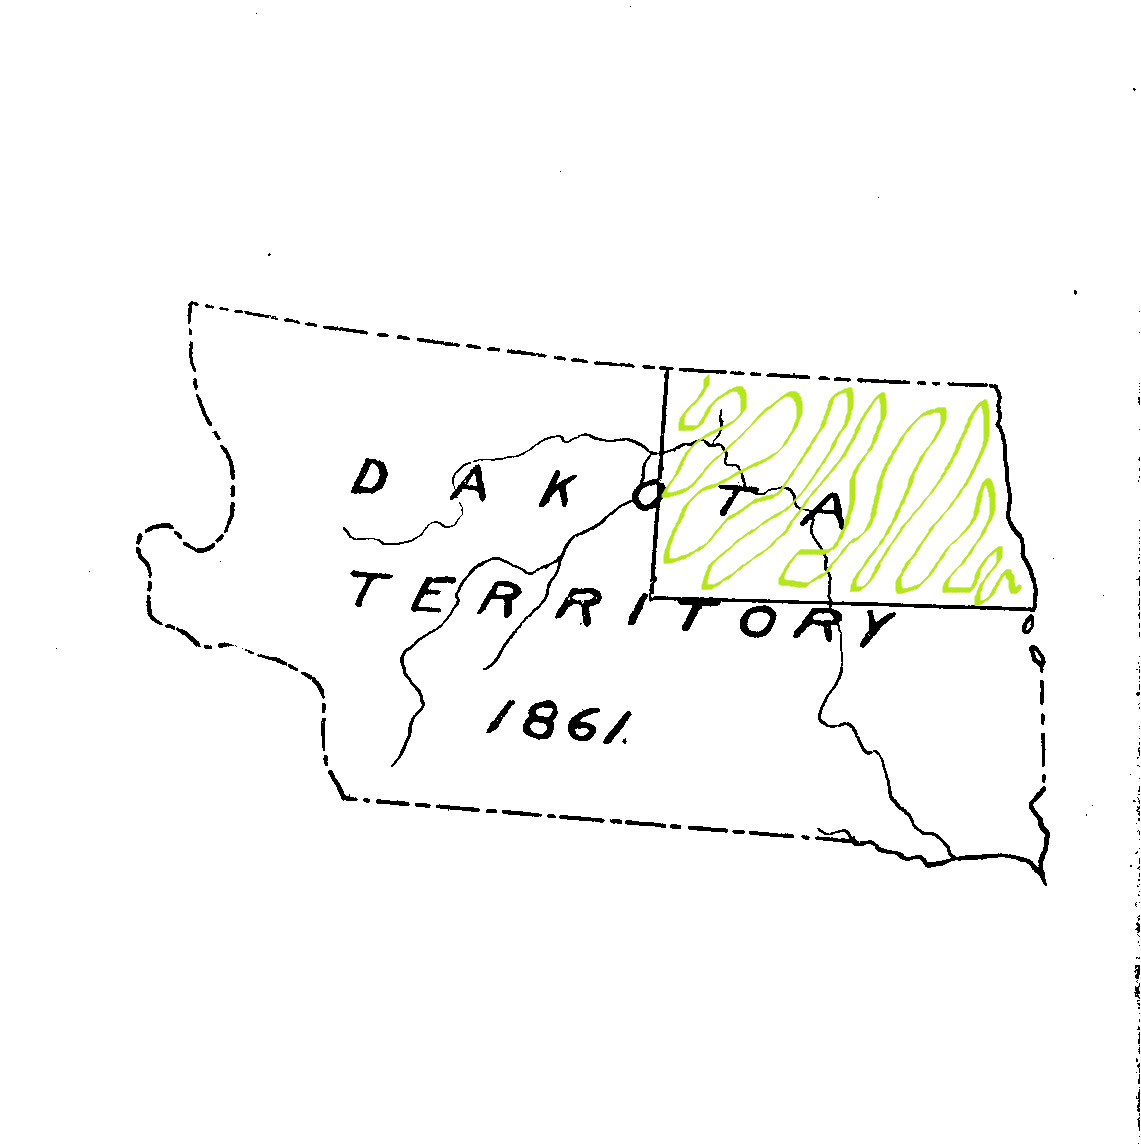 In 1861, Congress responded to the requests of the residents of Yankton and created Dakota Territory. Once again, the shape changed. Nebraska was no longer the governing body of western Dakota. Now, the tiny villages of Yankton, Sioux Falls, and Pembina were responsible for governing a huge territory that spread across modern day Montana and Wyoming.